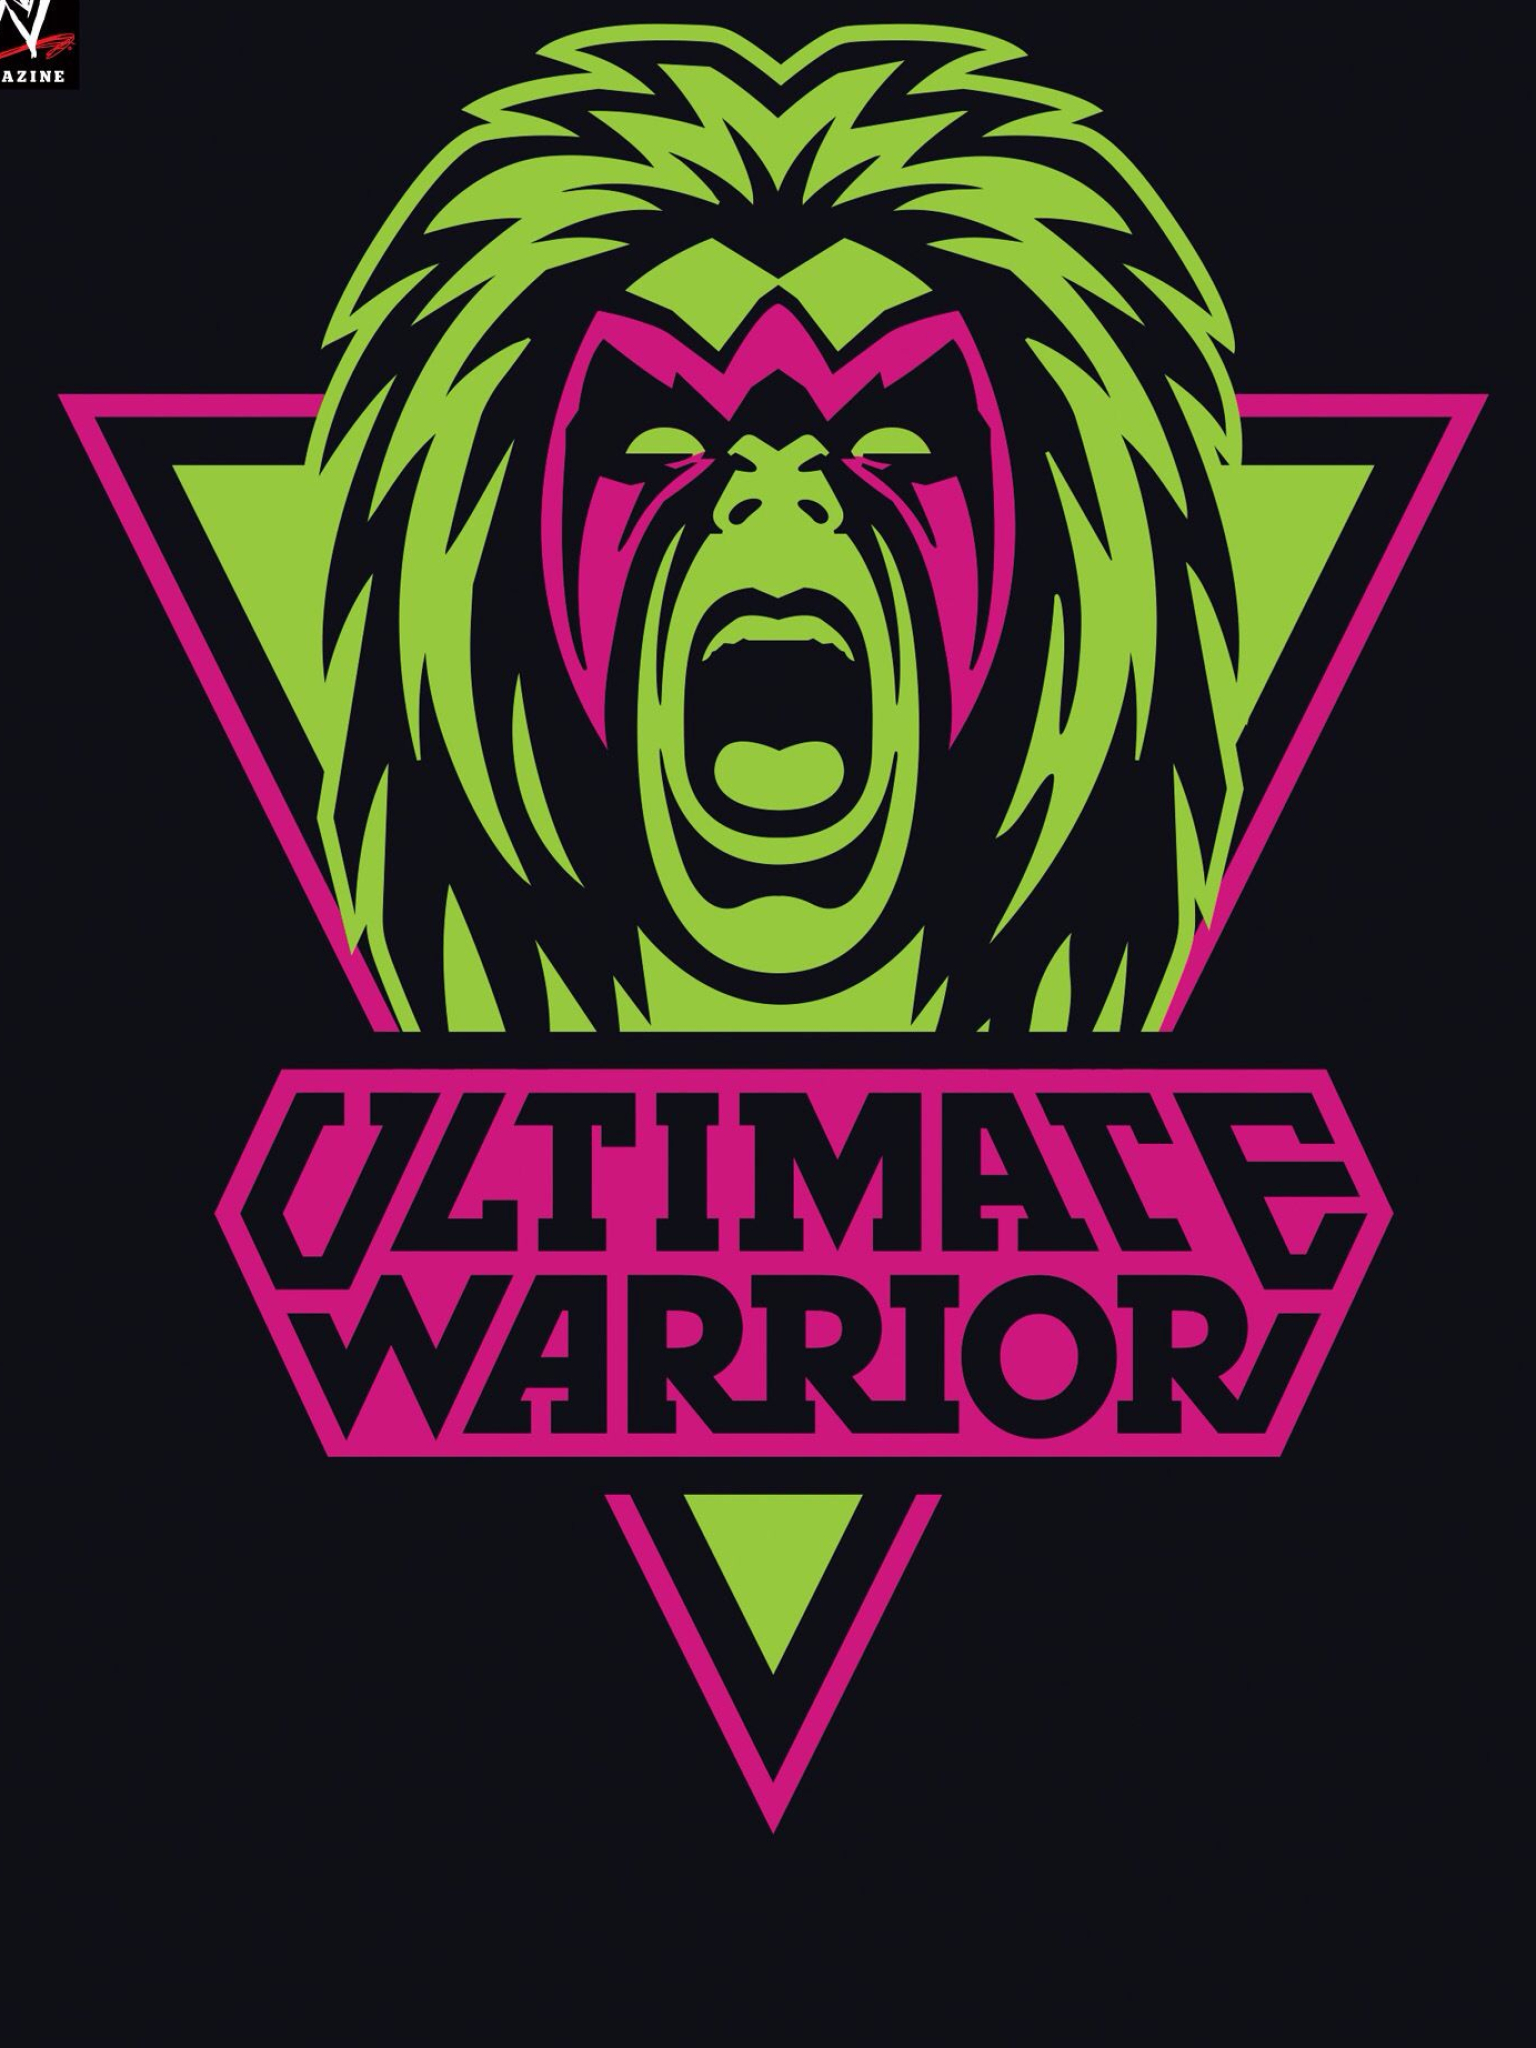 1536x2048 WWE Magazine Ultimate Warrior Poster, &Acirc;&copy;WWE. All rights reserved | Warrior logo, Ultimate warrior, Wwe